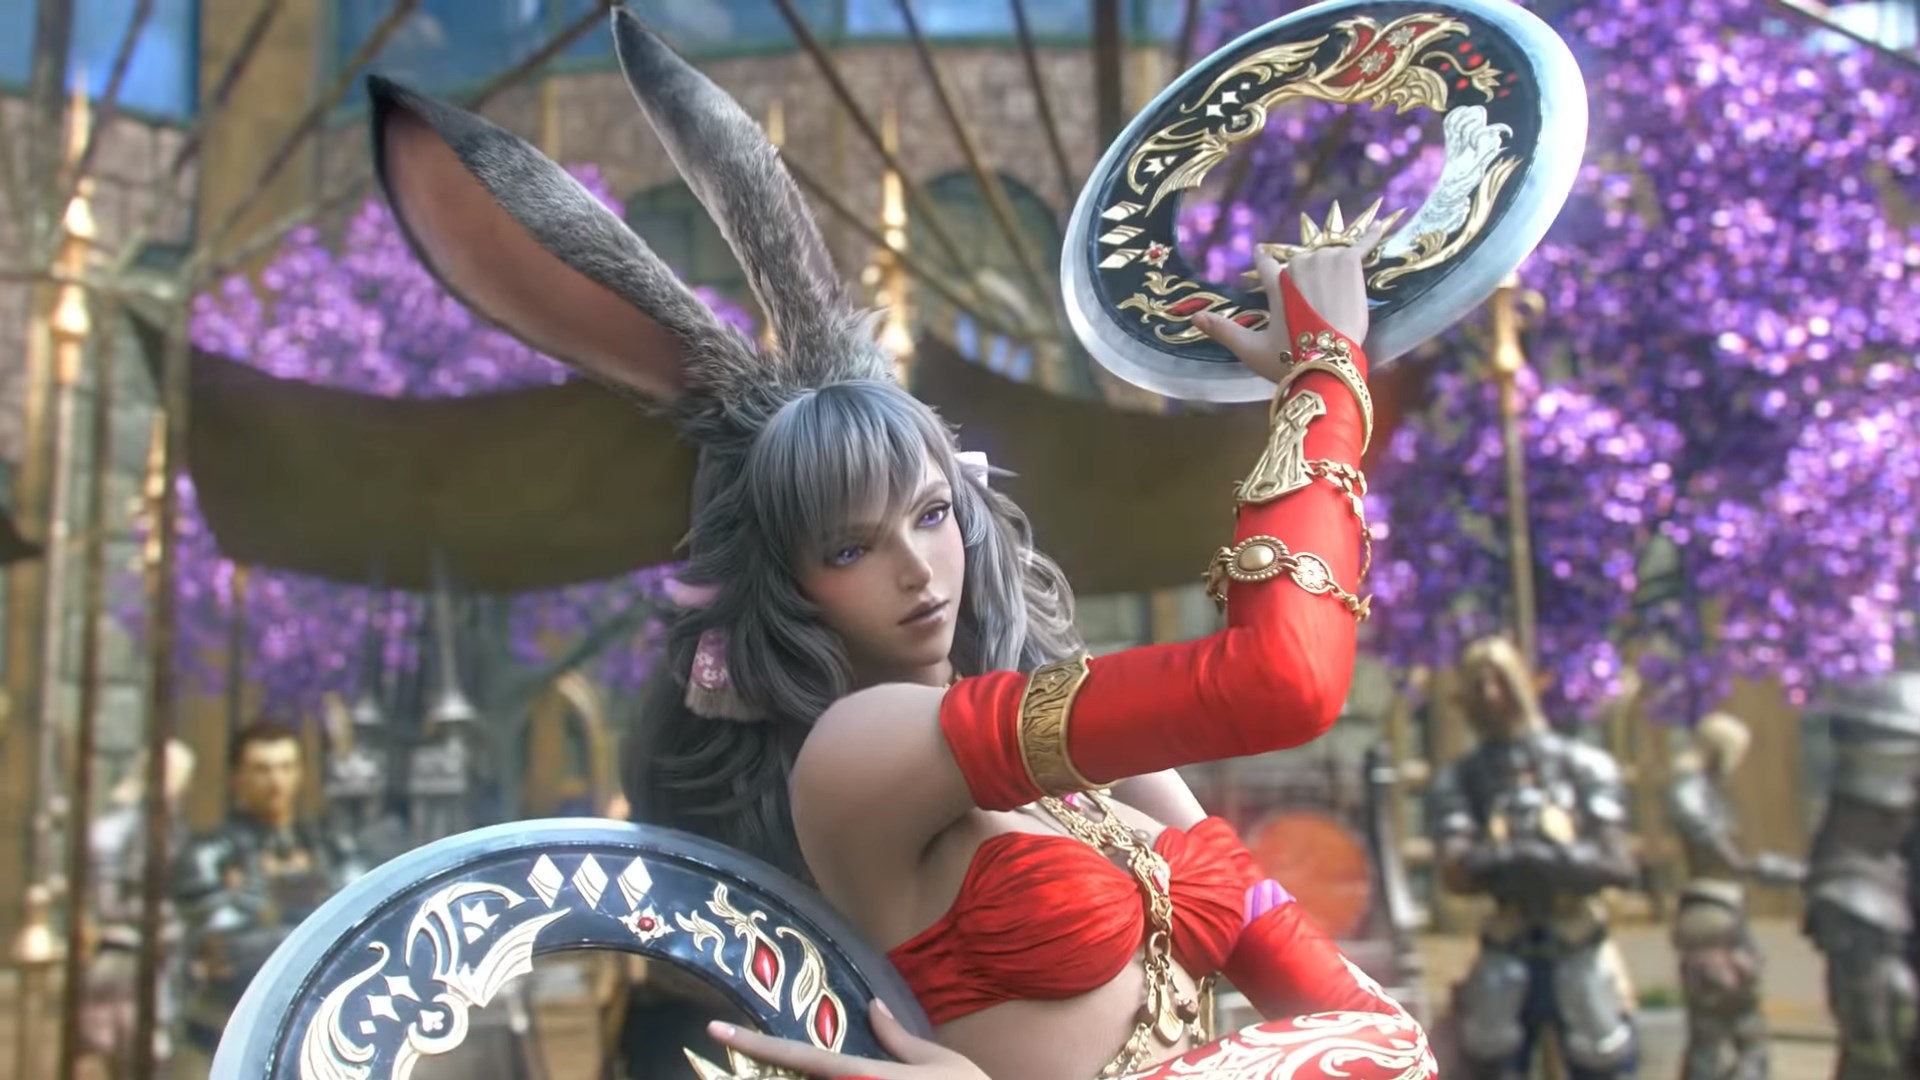 The new Dancer job is represented by Viera